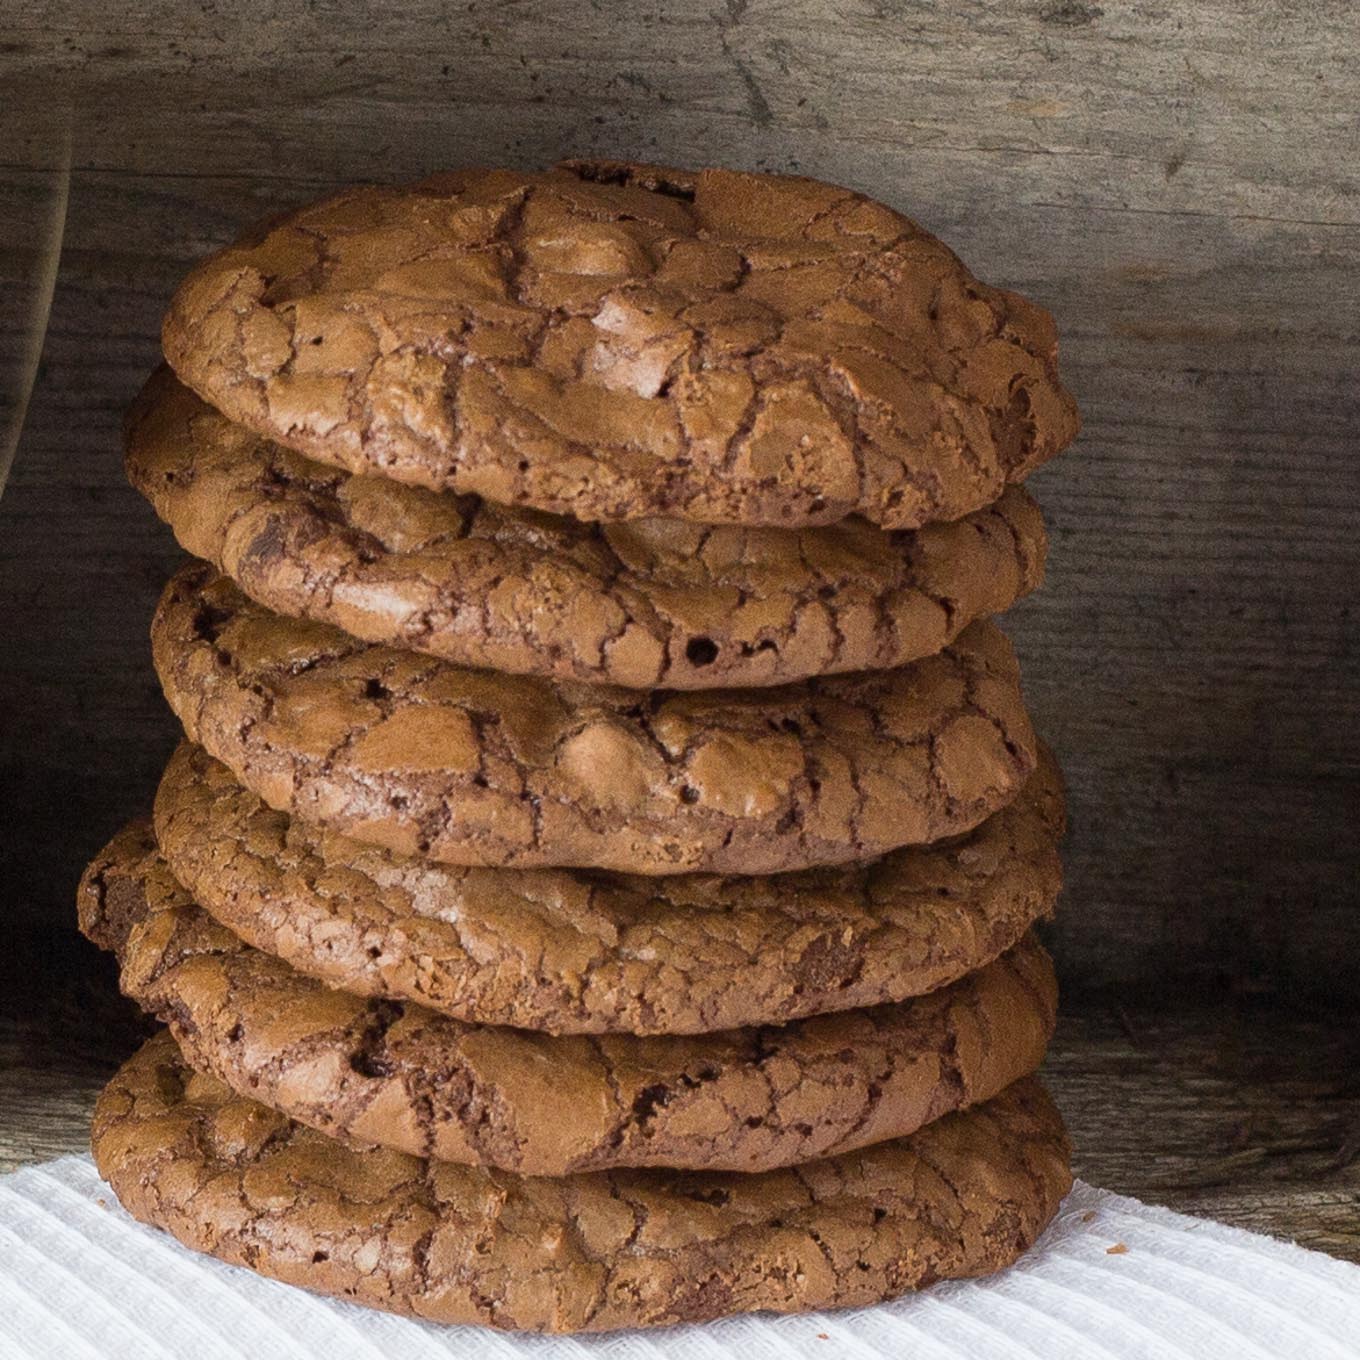 Stack of chocolate cookies on white cloth.